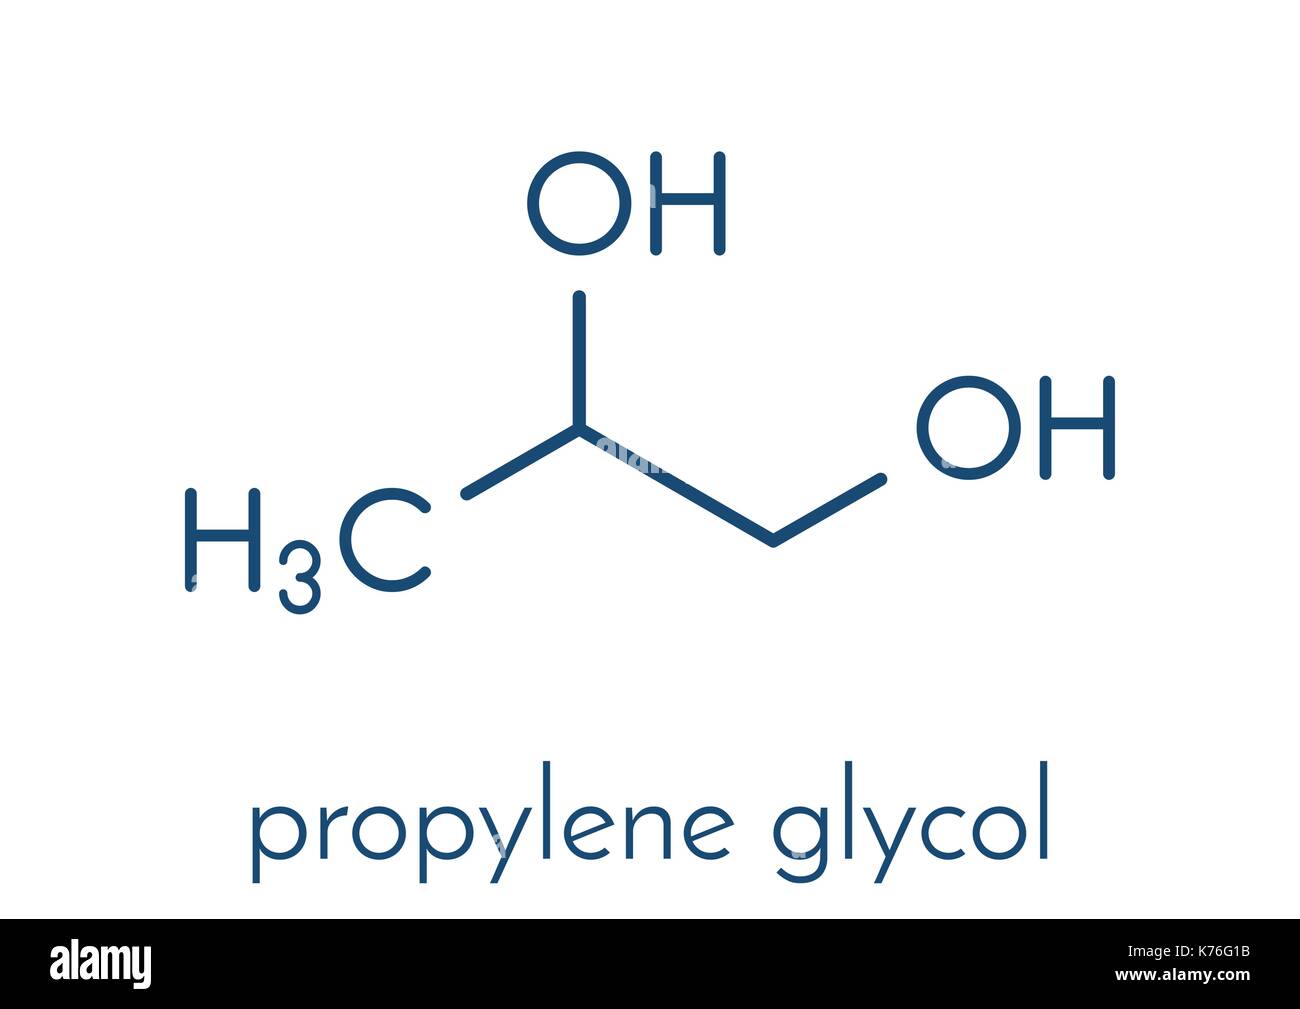 Propylene glycol (1,2-propanediol) molecule. Used as solvent in pharmaceutical drugs, as food additive, in de-icing solutions, etc Skeletal formula. Stock Vector